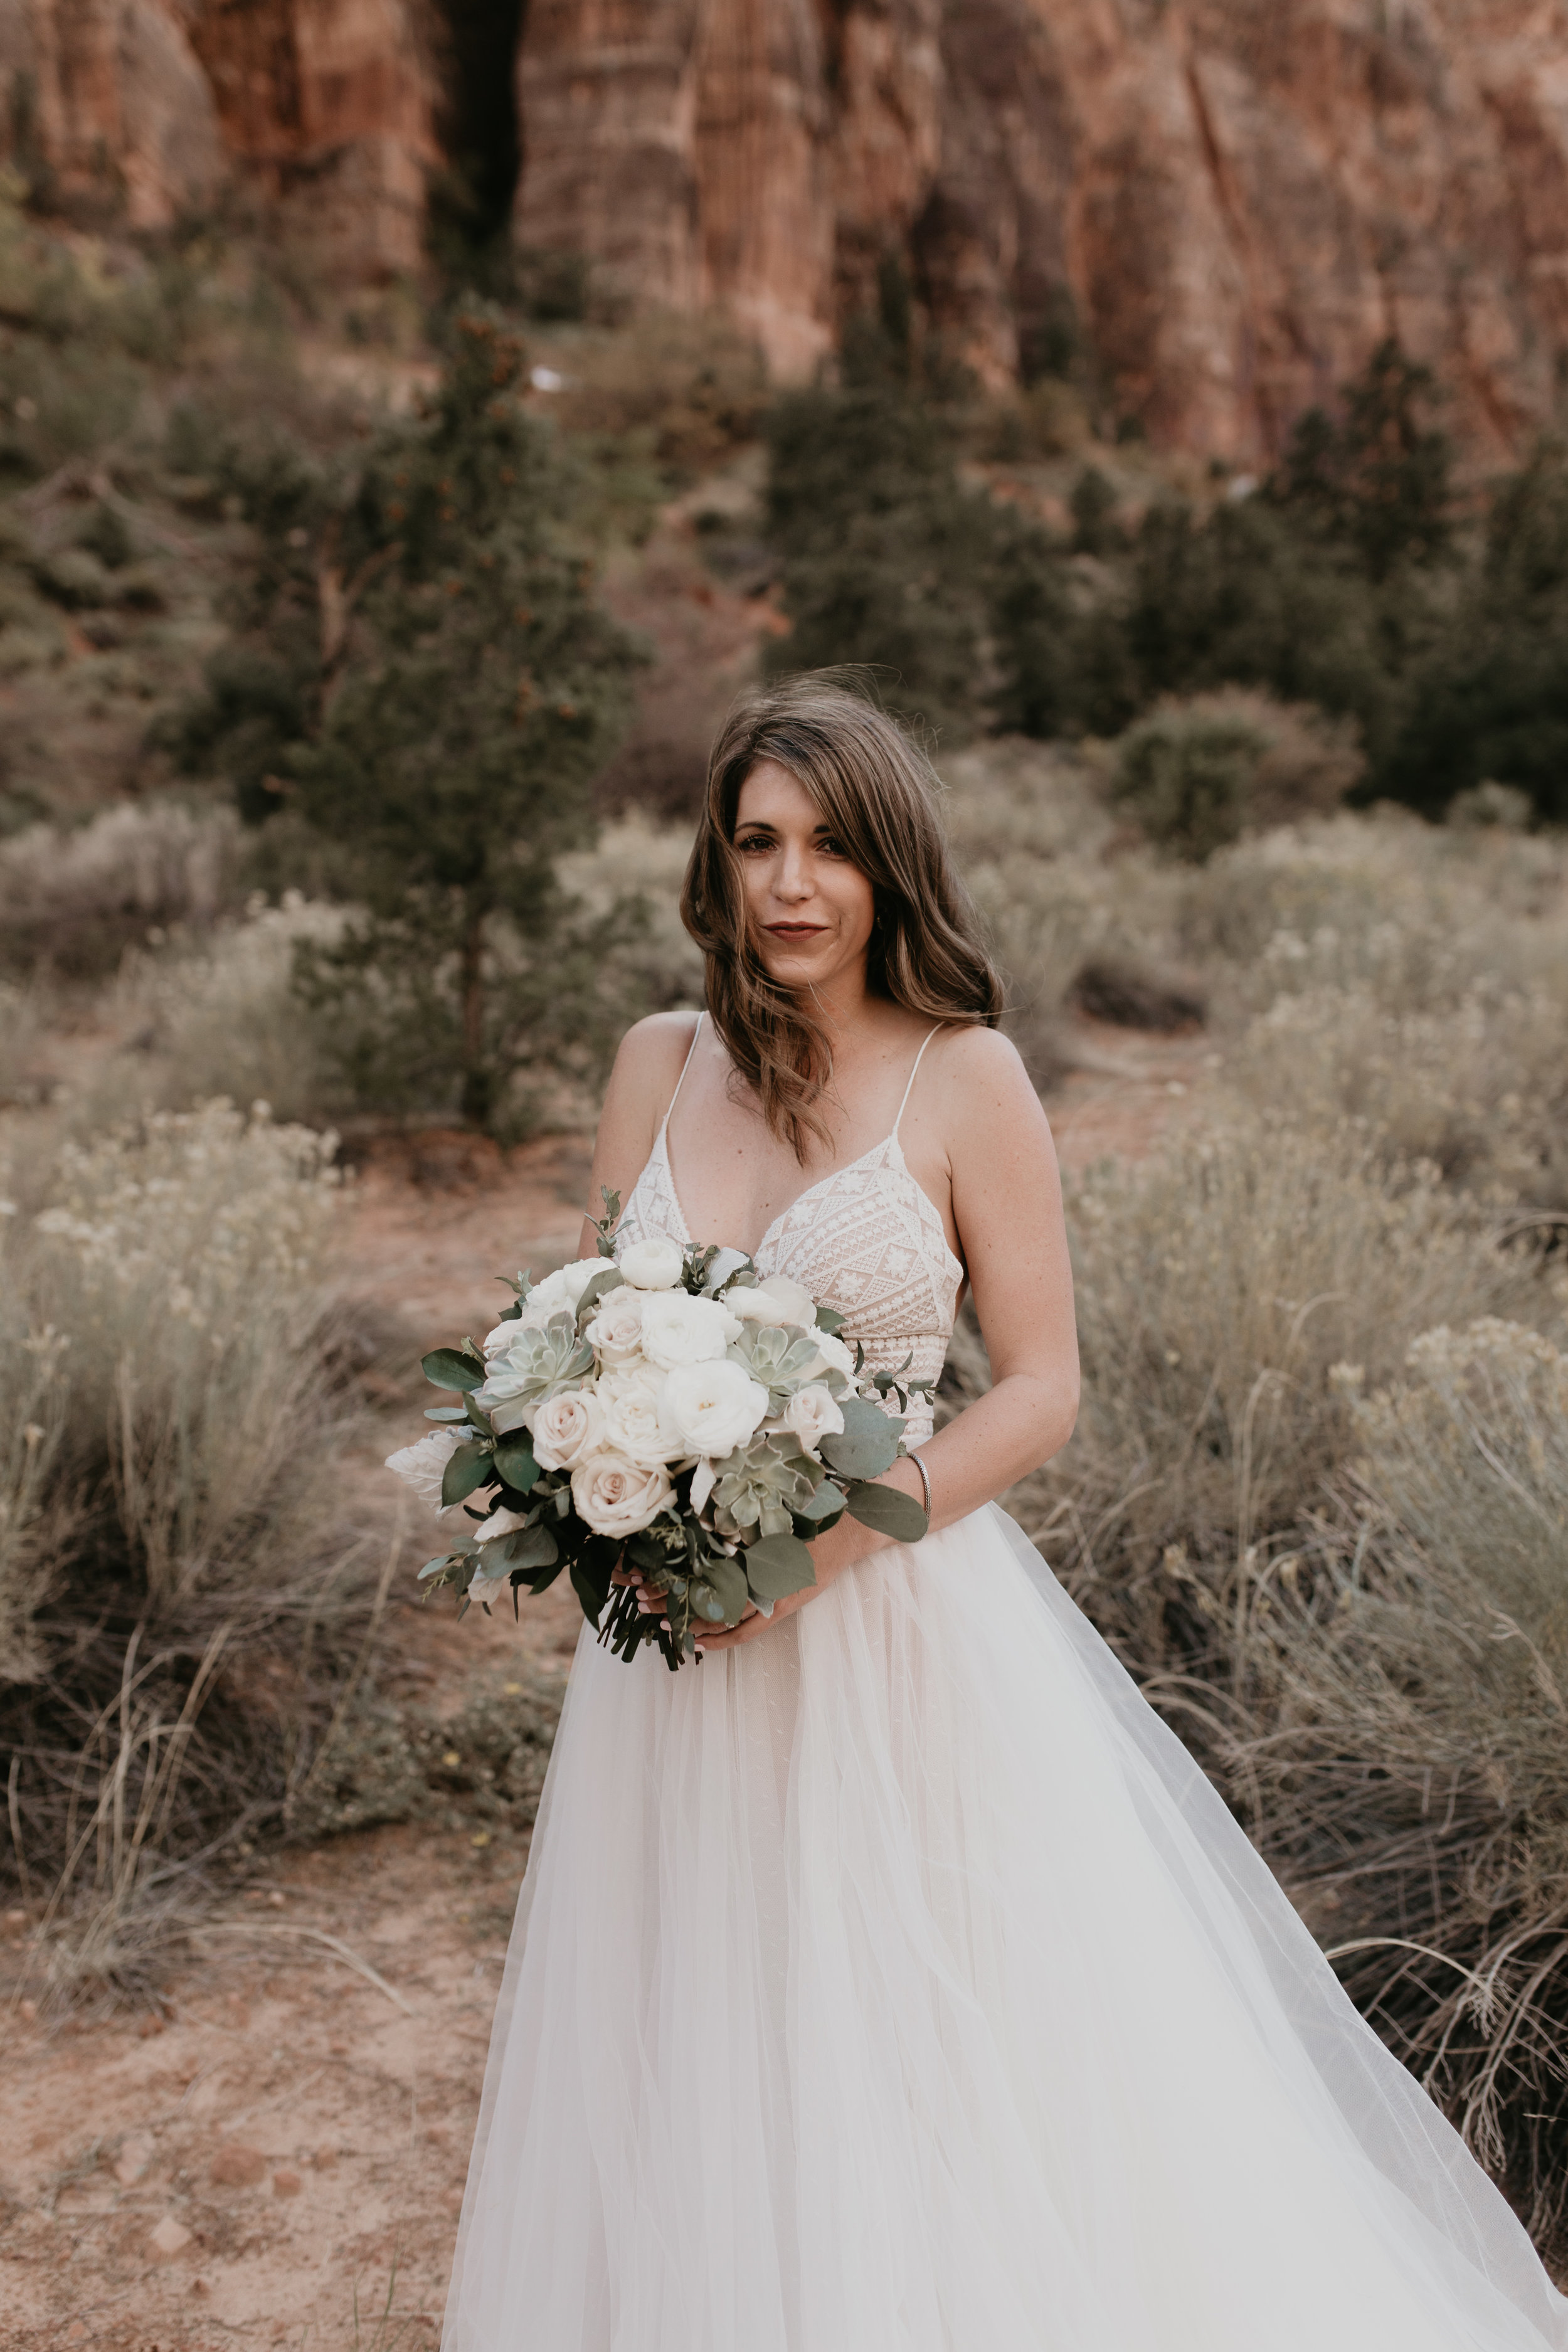 nicole-daacke-photography-zion-national-park-elopement-photographer-canyon-overlook-trail-elope-hiking-adventure-wedding-photos-fall-utah-red-rock-canyon-stgeorge-eloping-photographer-14.jpg